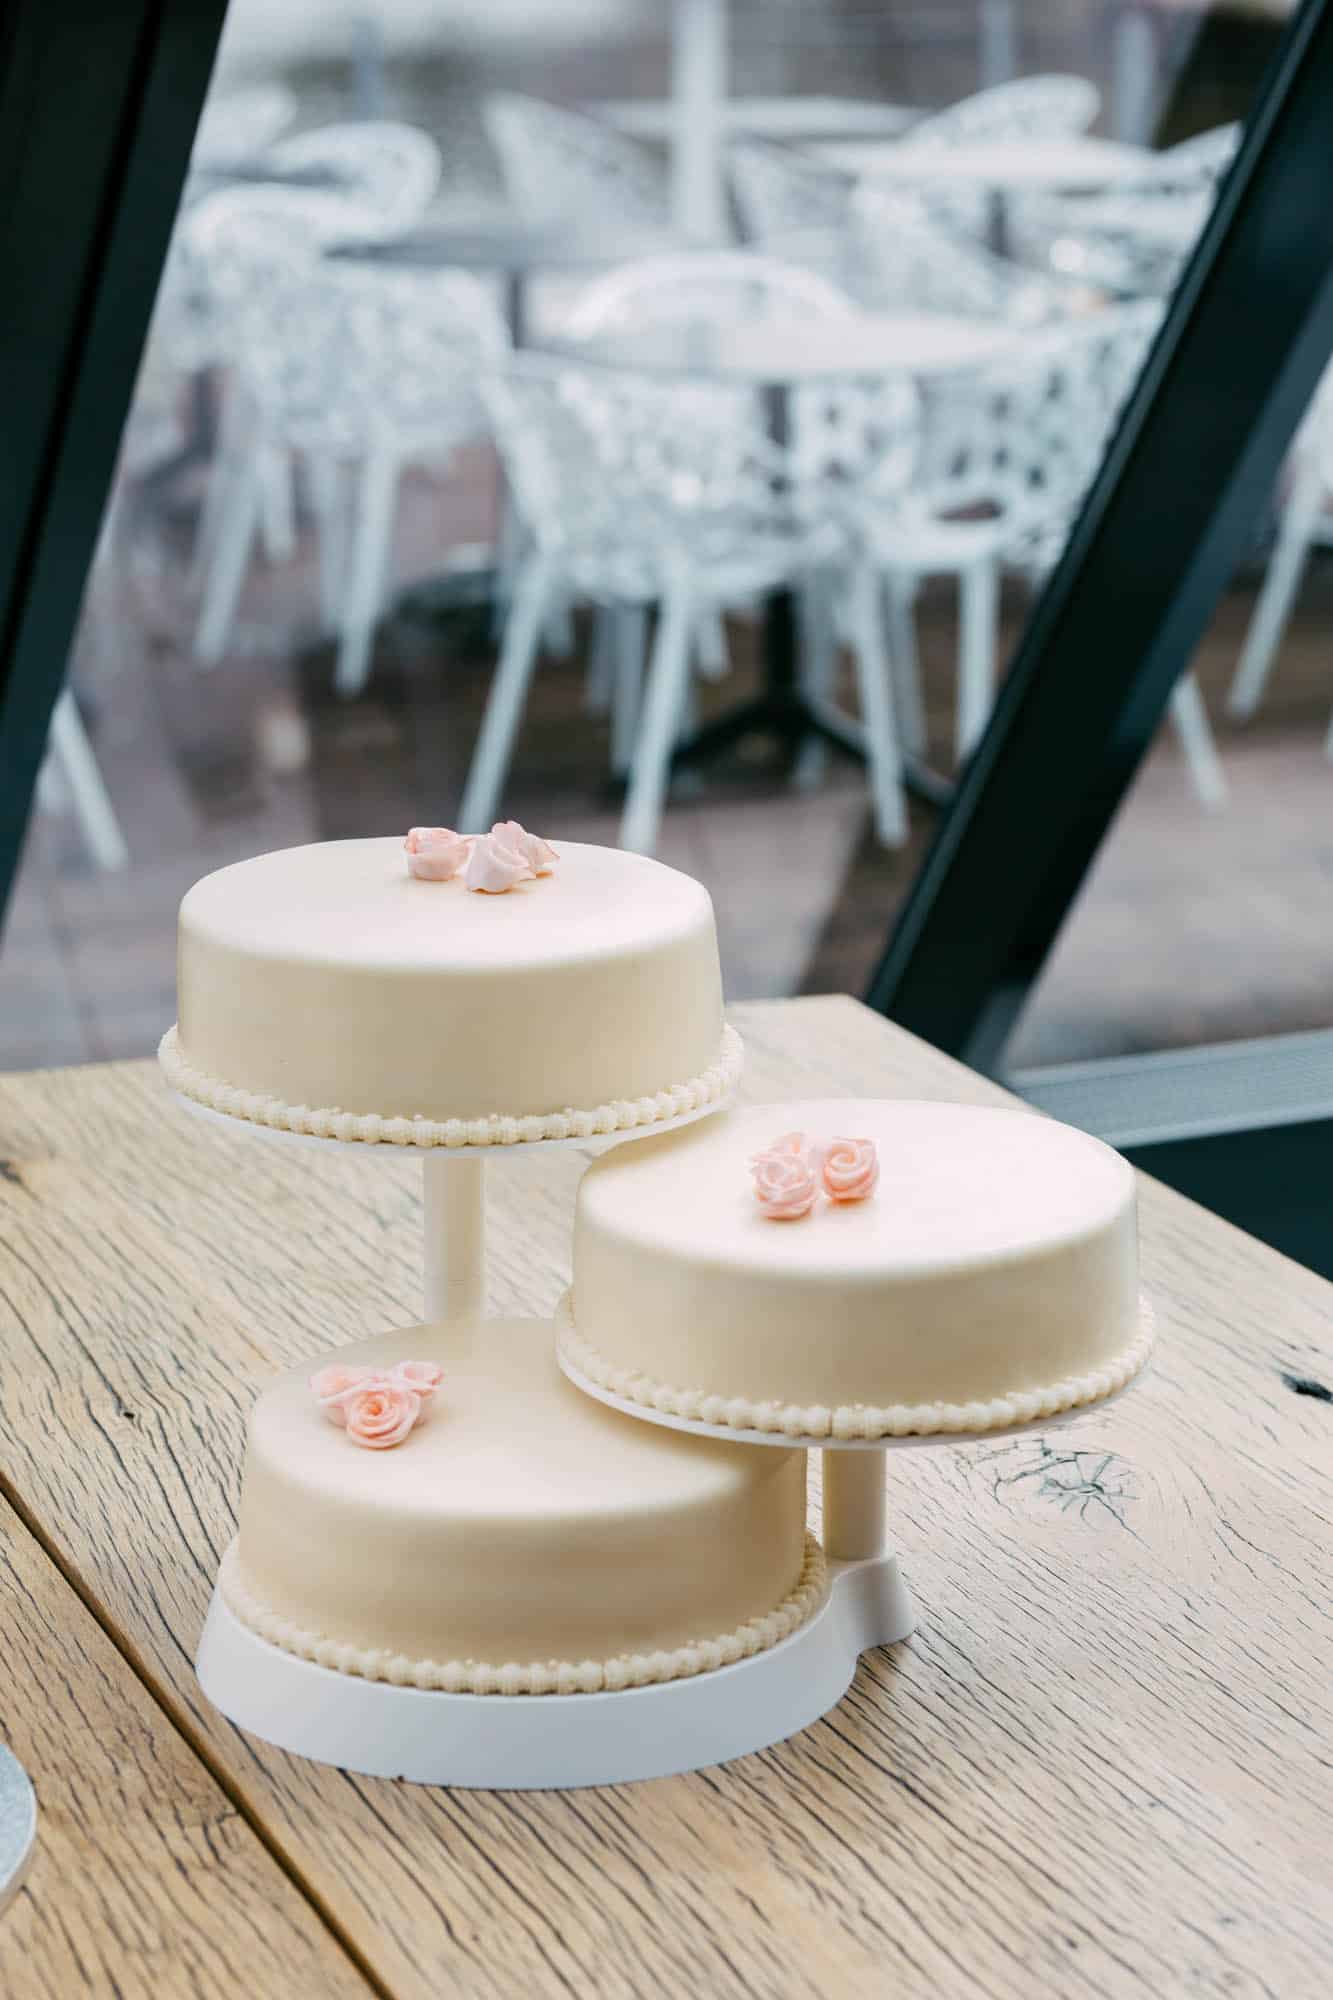 Wedding cakes on a wooden table.